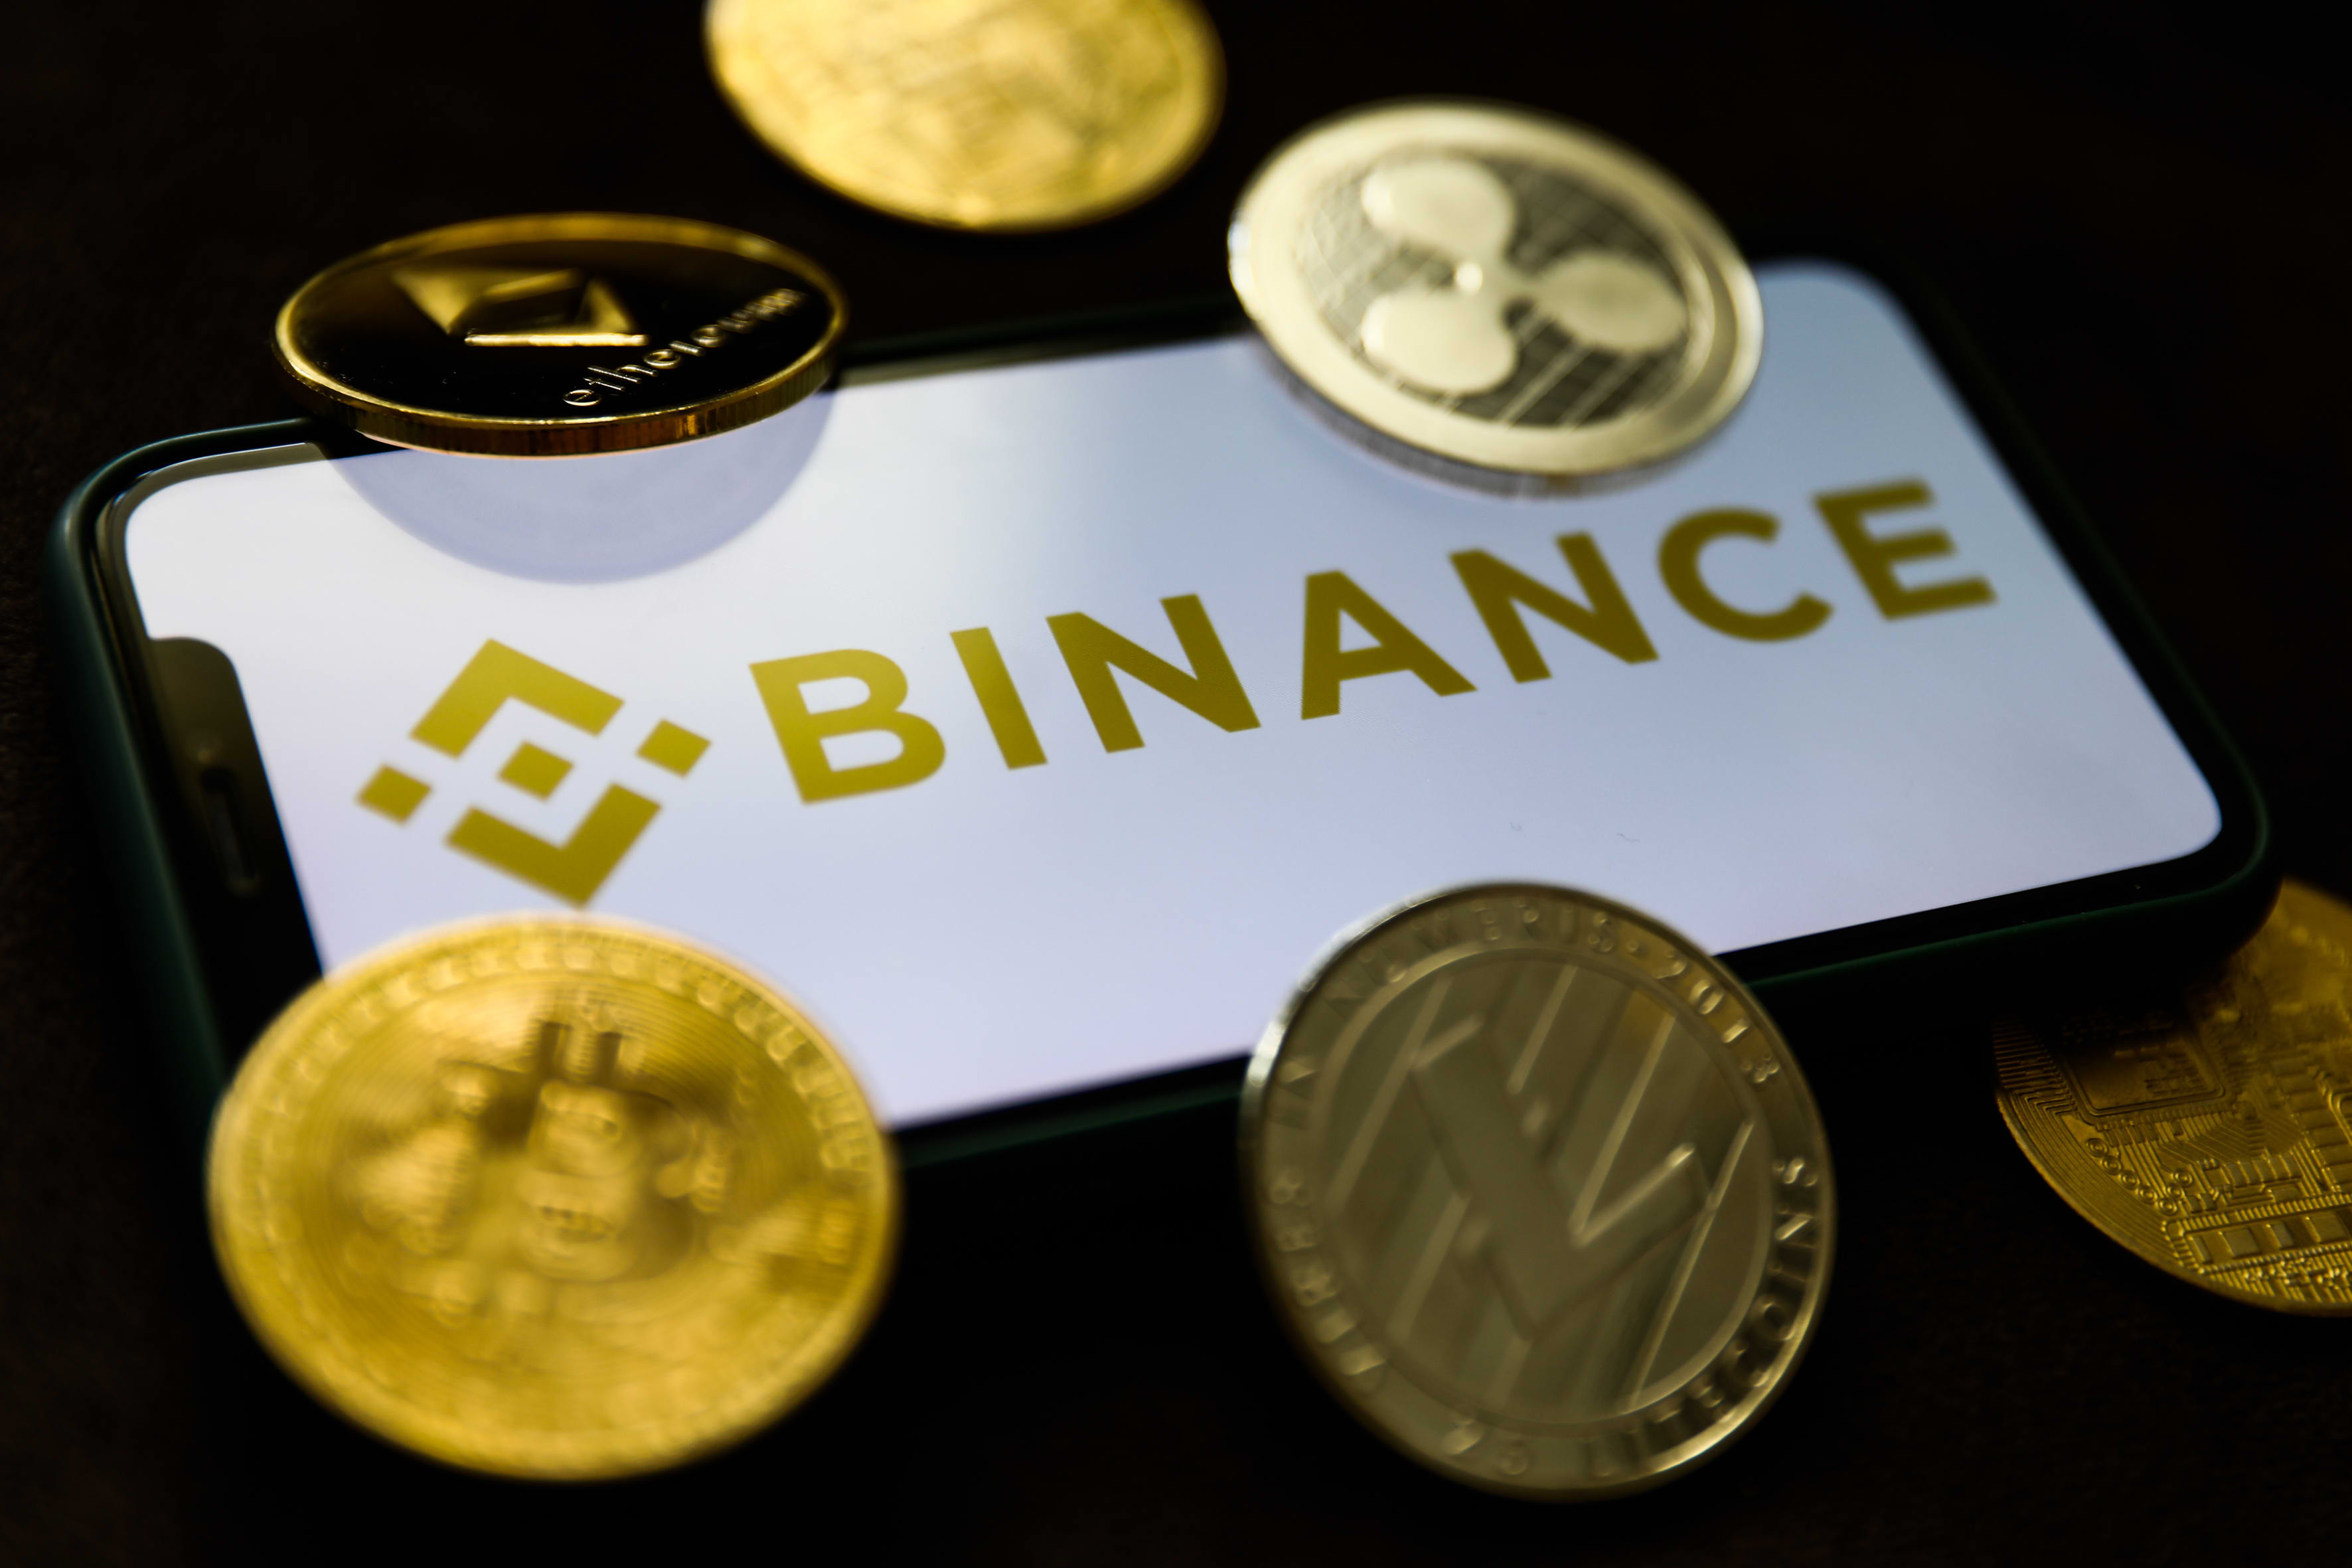 Binance russian be coins to invest in on kucoin 2018